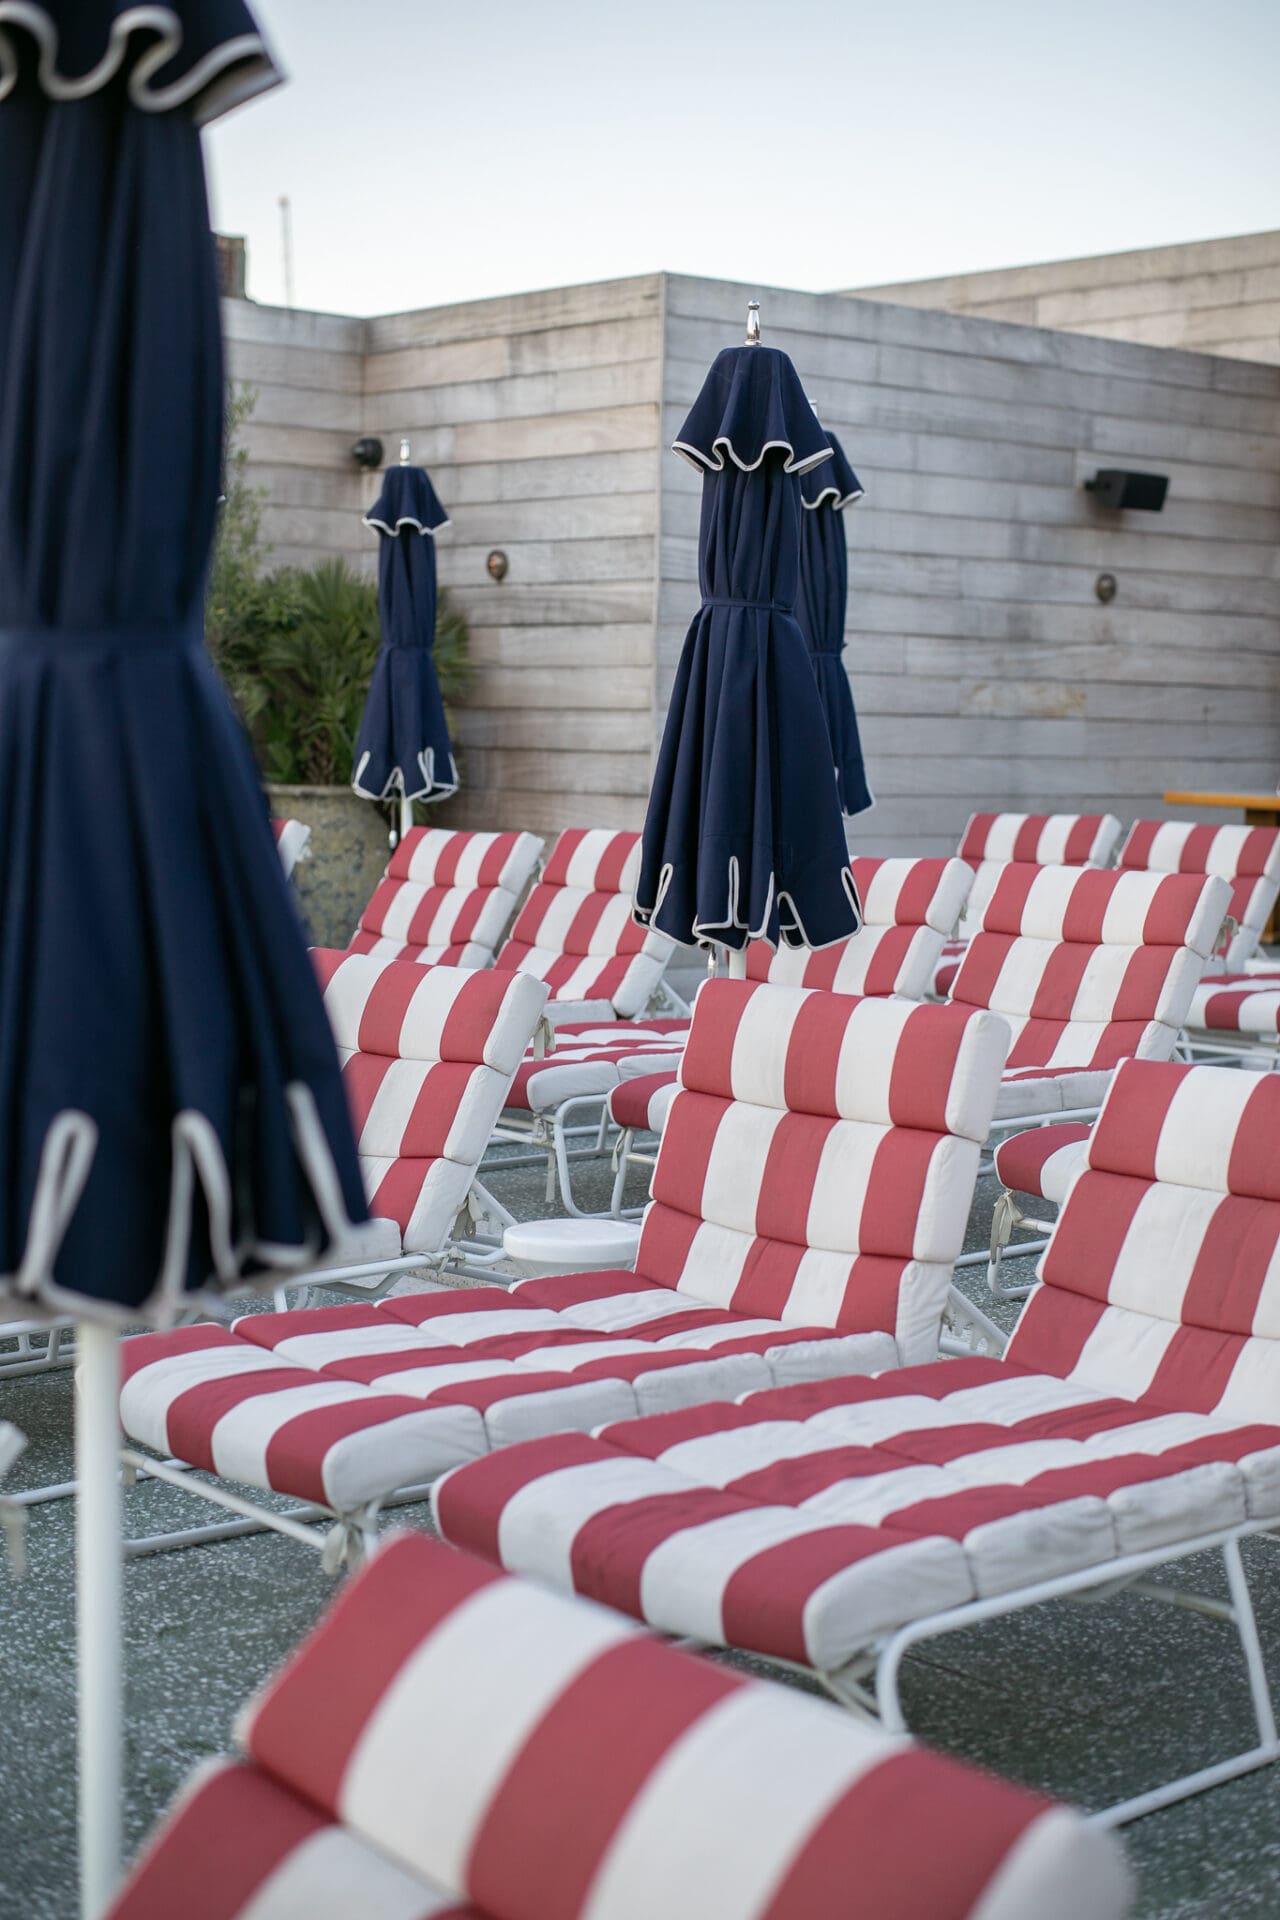 Best hotels in Shoreditch, Dalston and Hackney | Red and white striped deck chairs with closed blue parasols on the rooftop of Shoreditch House